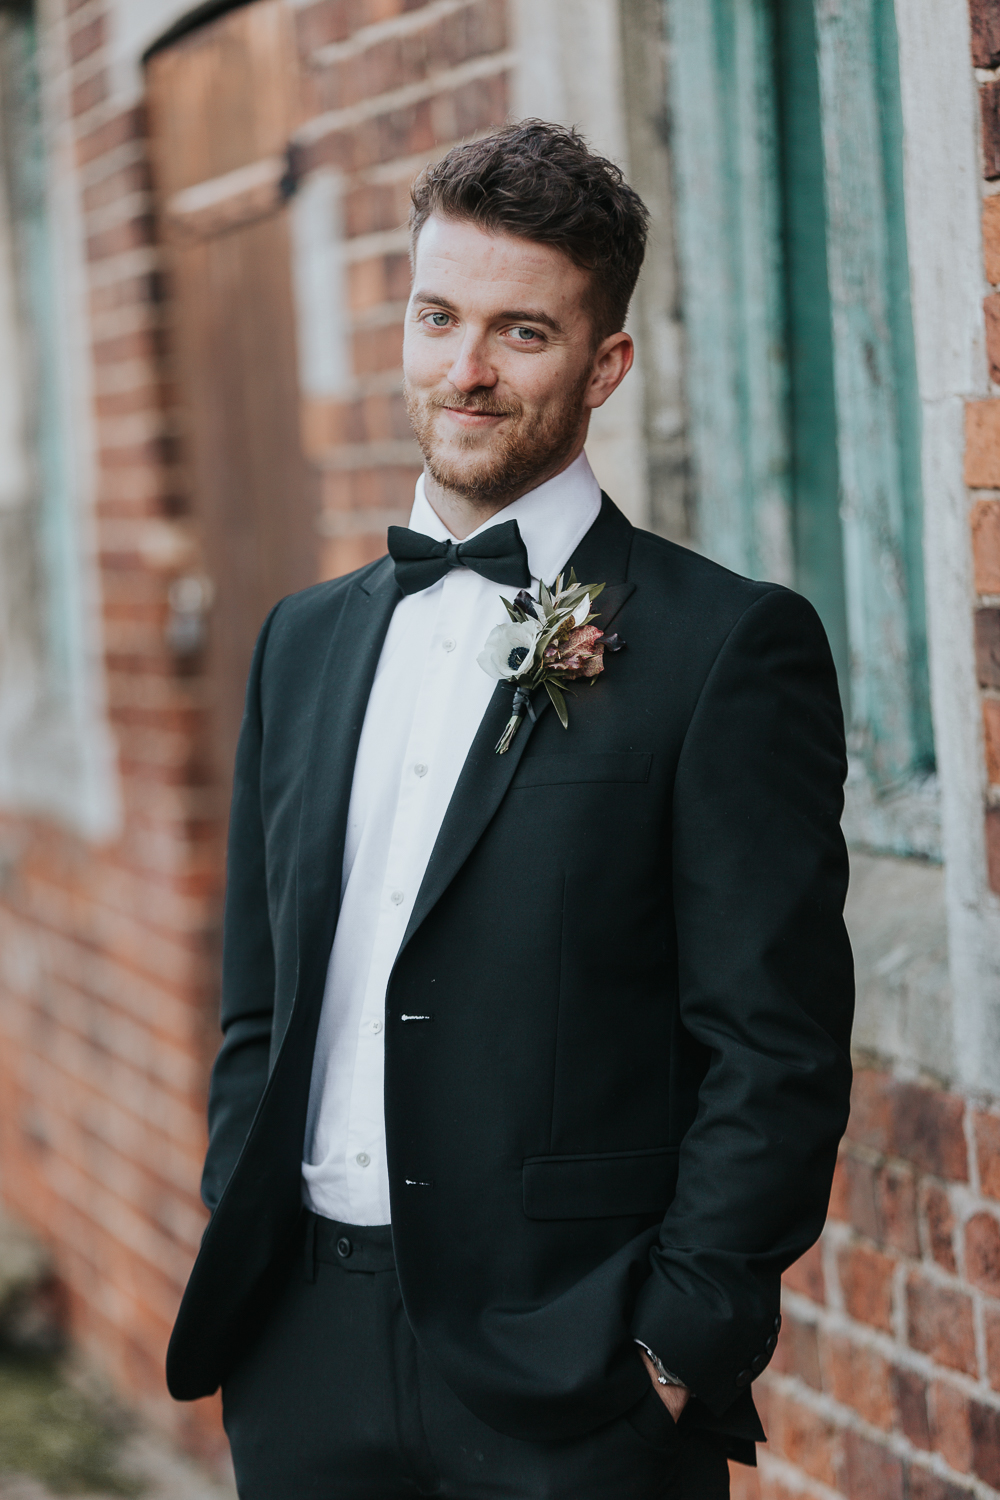 The groom changed up for a classic black tux